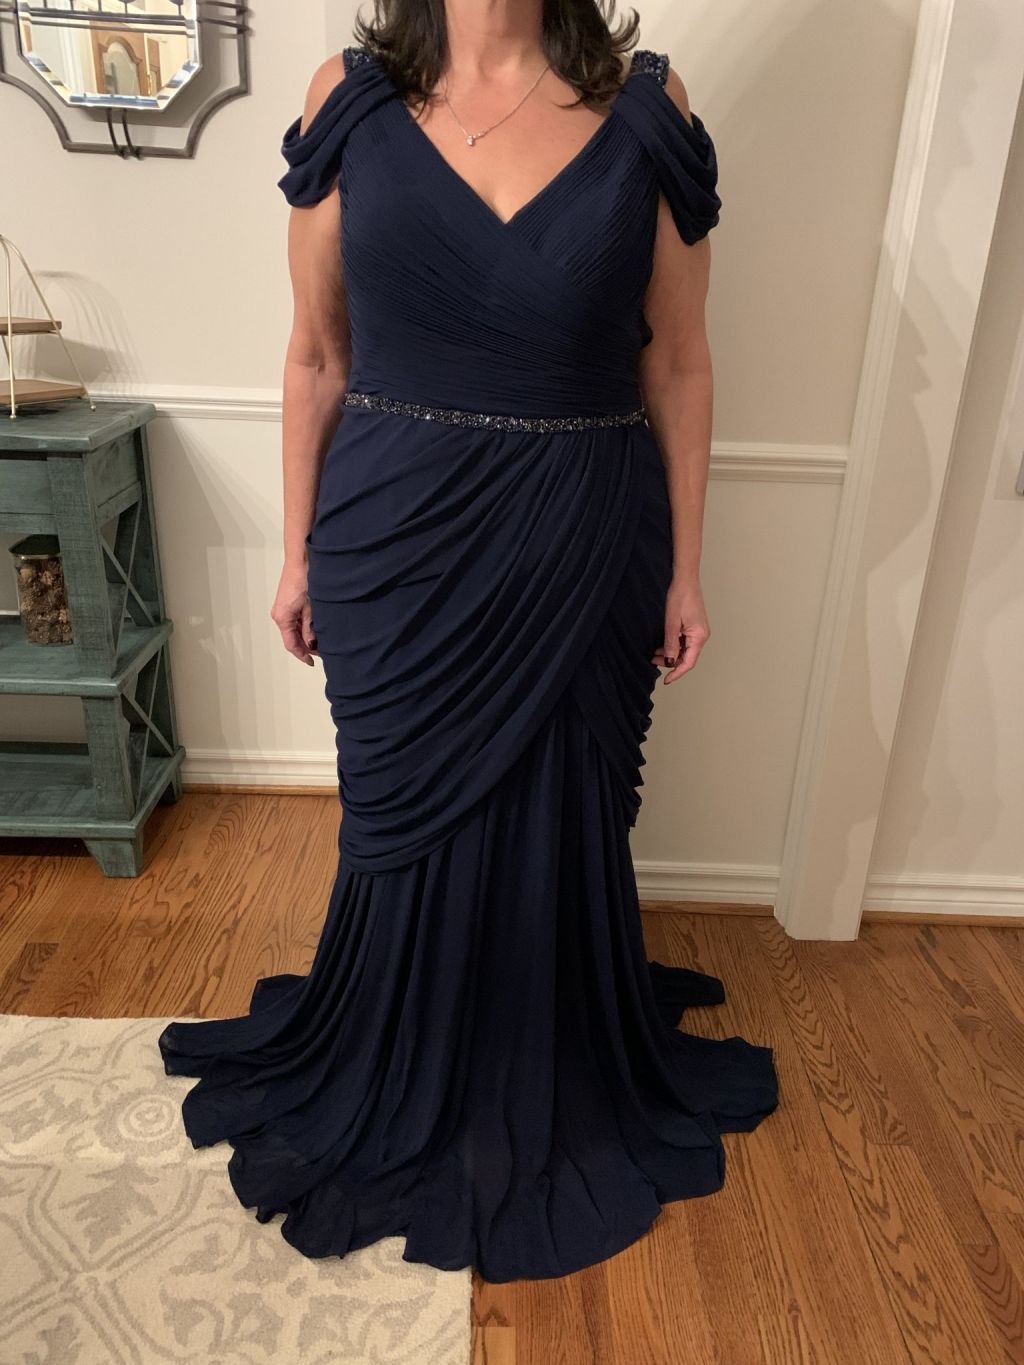 C2022-EP28 - Off the shoulder navy chiffon plus size evening gown